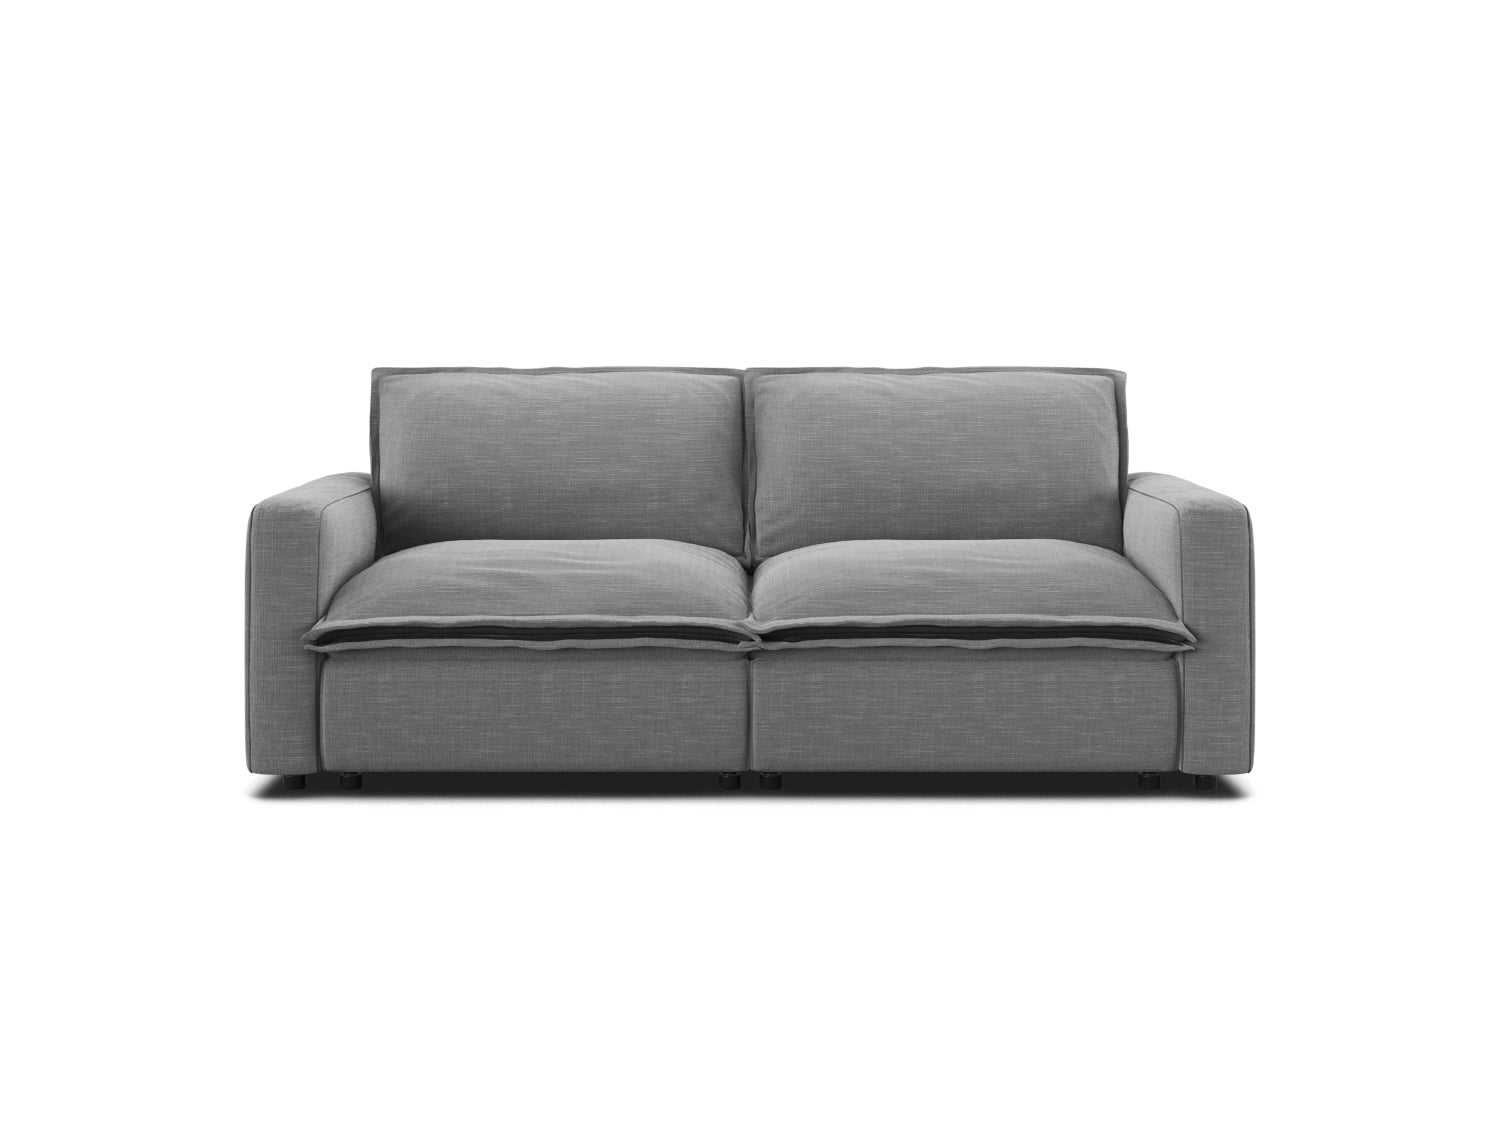 Homebody The Couch